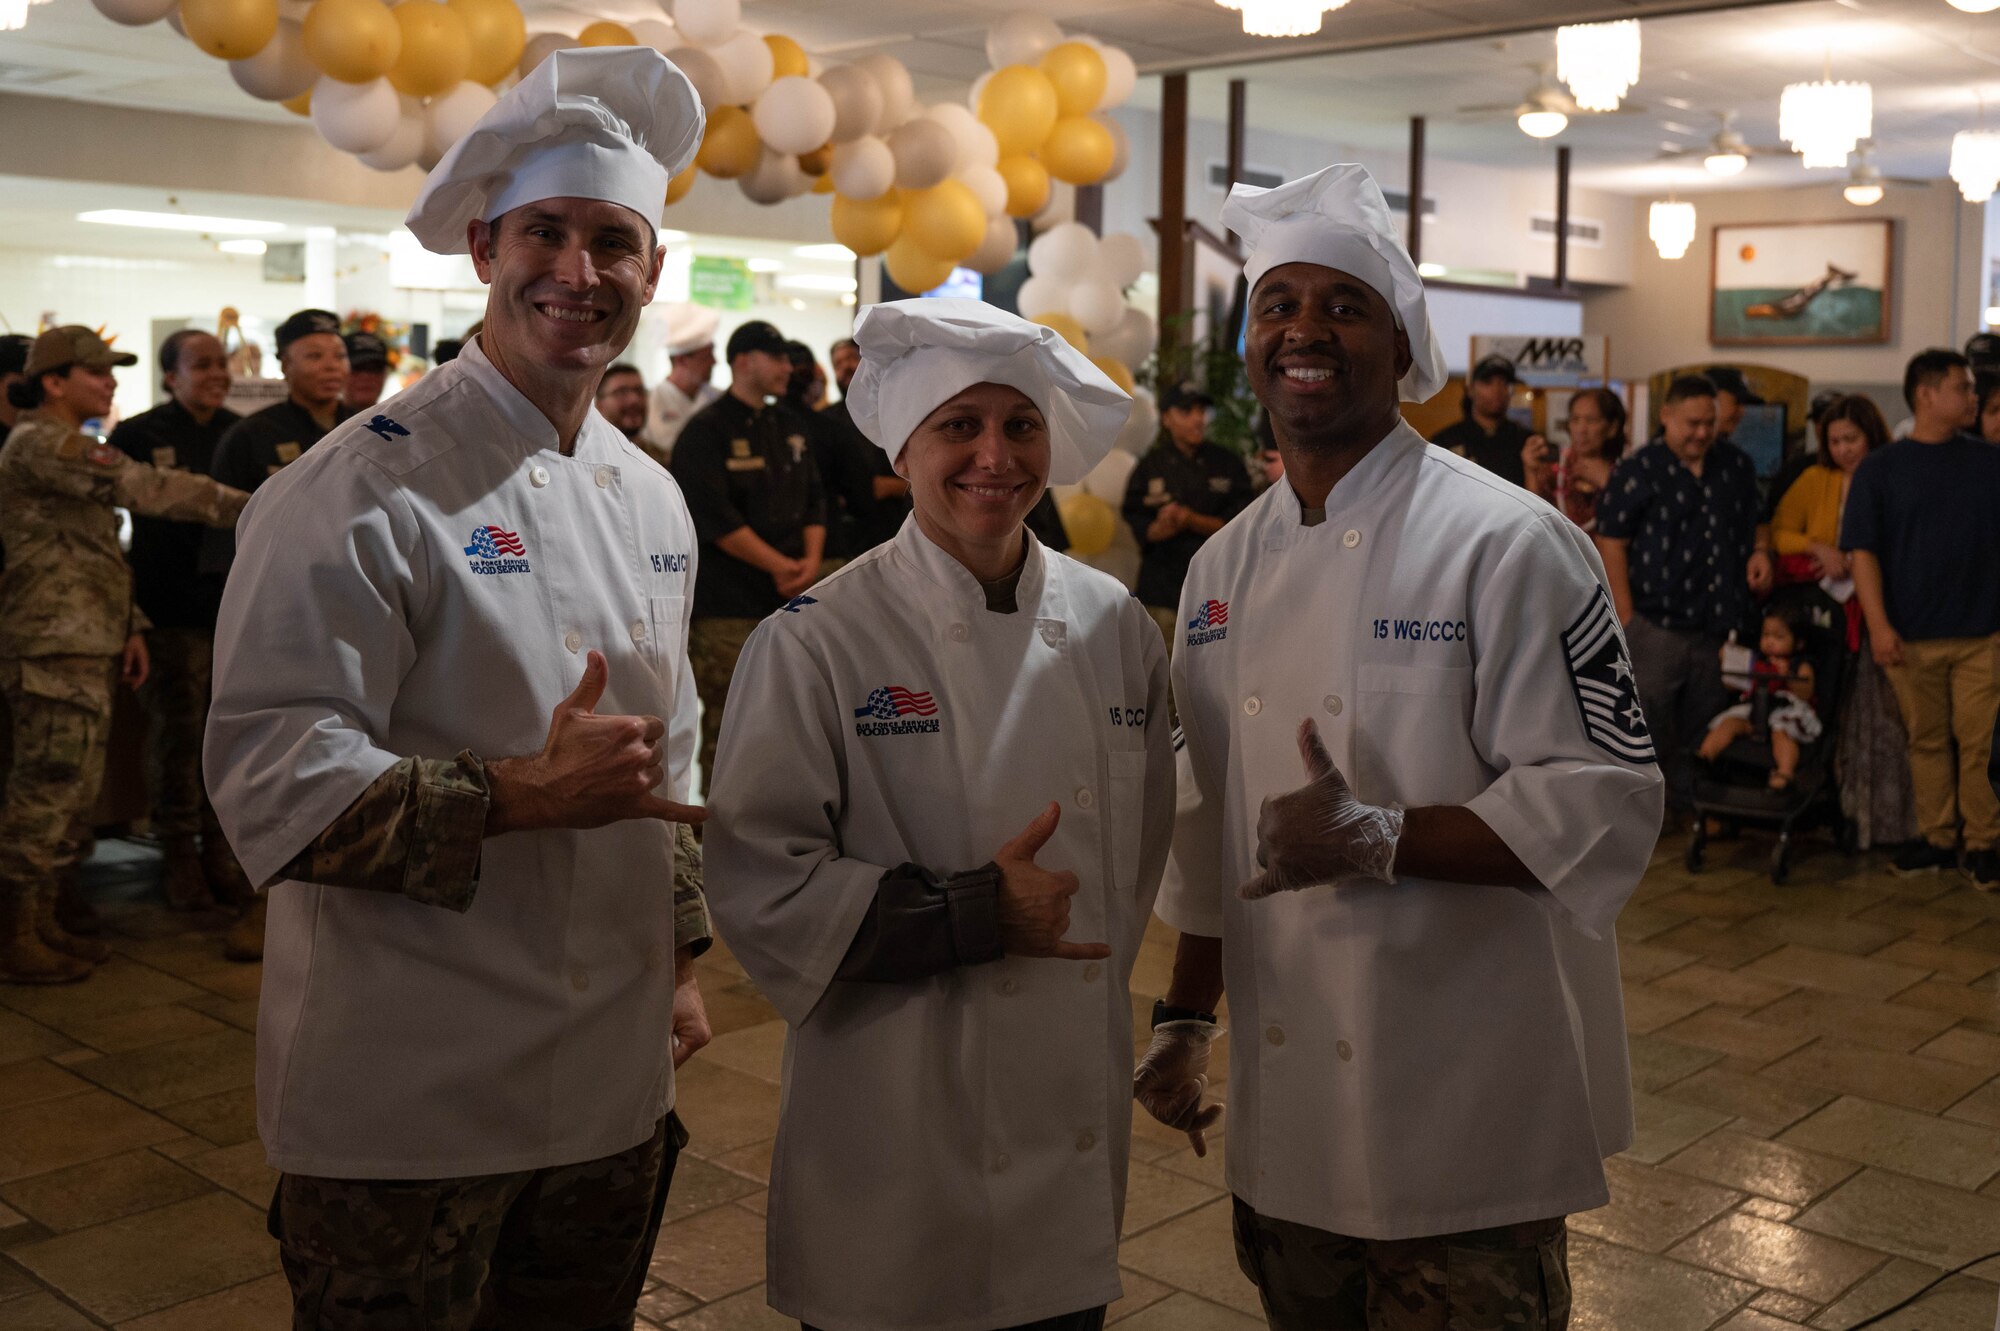 Col. Michele Lo Bianco, 15th Wing commander, Col. Keith Young, 15th Wing deputy commander, and Chief Master Sgt. Anthony Thompson Jr., 15th Wing command chief, pose for a photo before serving food to Airmen and their families at a Thanksgiving celebration at Joint Base Pearl Harbor-Hickam, November 23, 2023. Leaders from the 15th Wing showed their appreciation to Airmen and their families by serving them lunch on Thanksgiving. (U.S. Air Force photo by 2nd Lieutenant Margaret Blice)